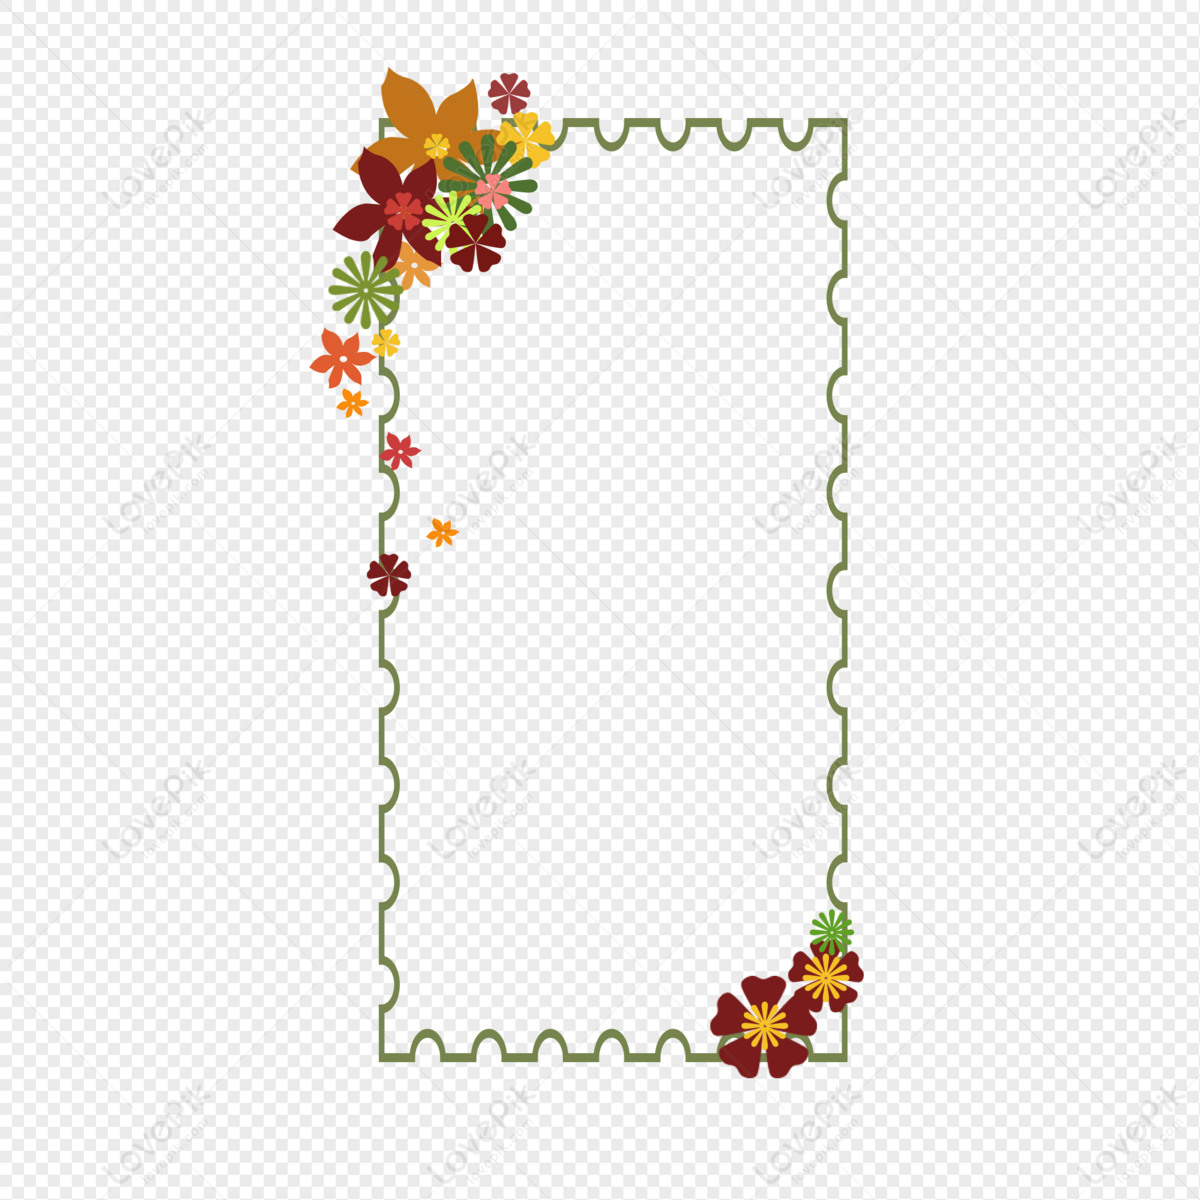 Flower Border Frame Png Image And Clipart Image For Free Download - Lovepik  | 401477538